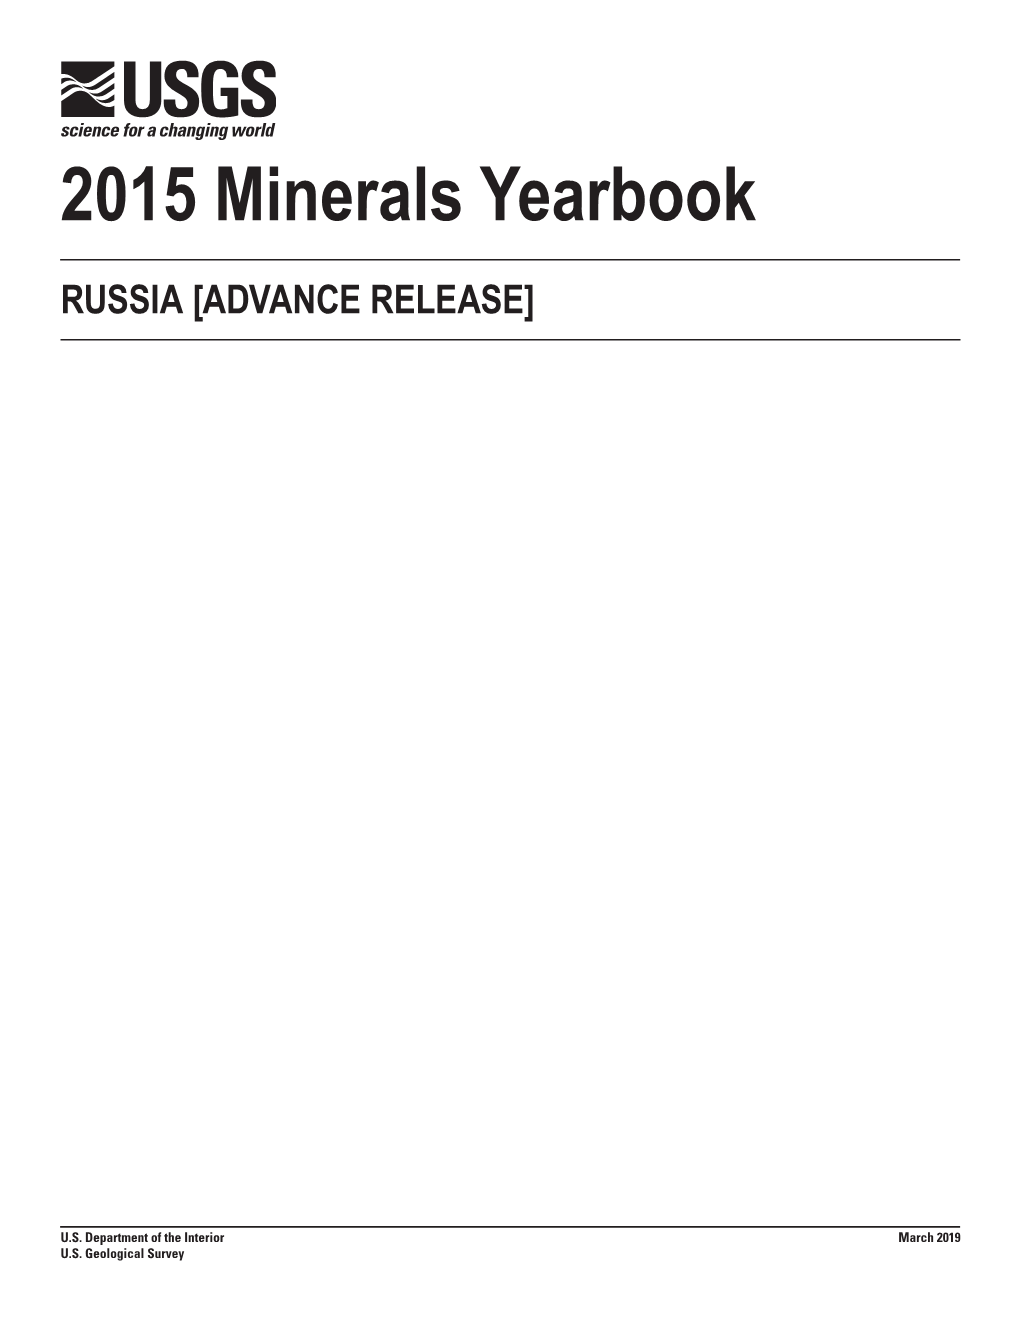 The Mineral Industry of Russia in 2015